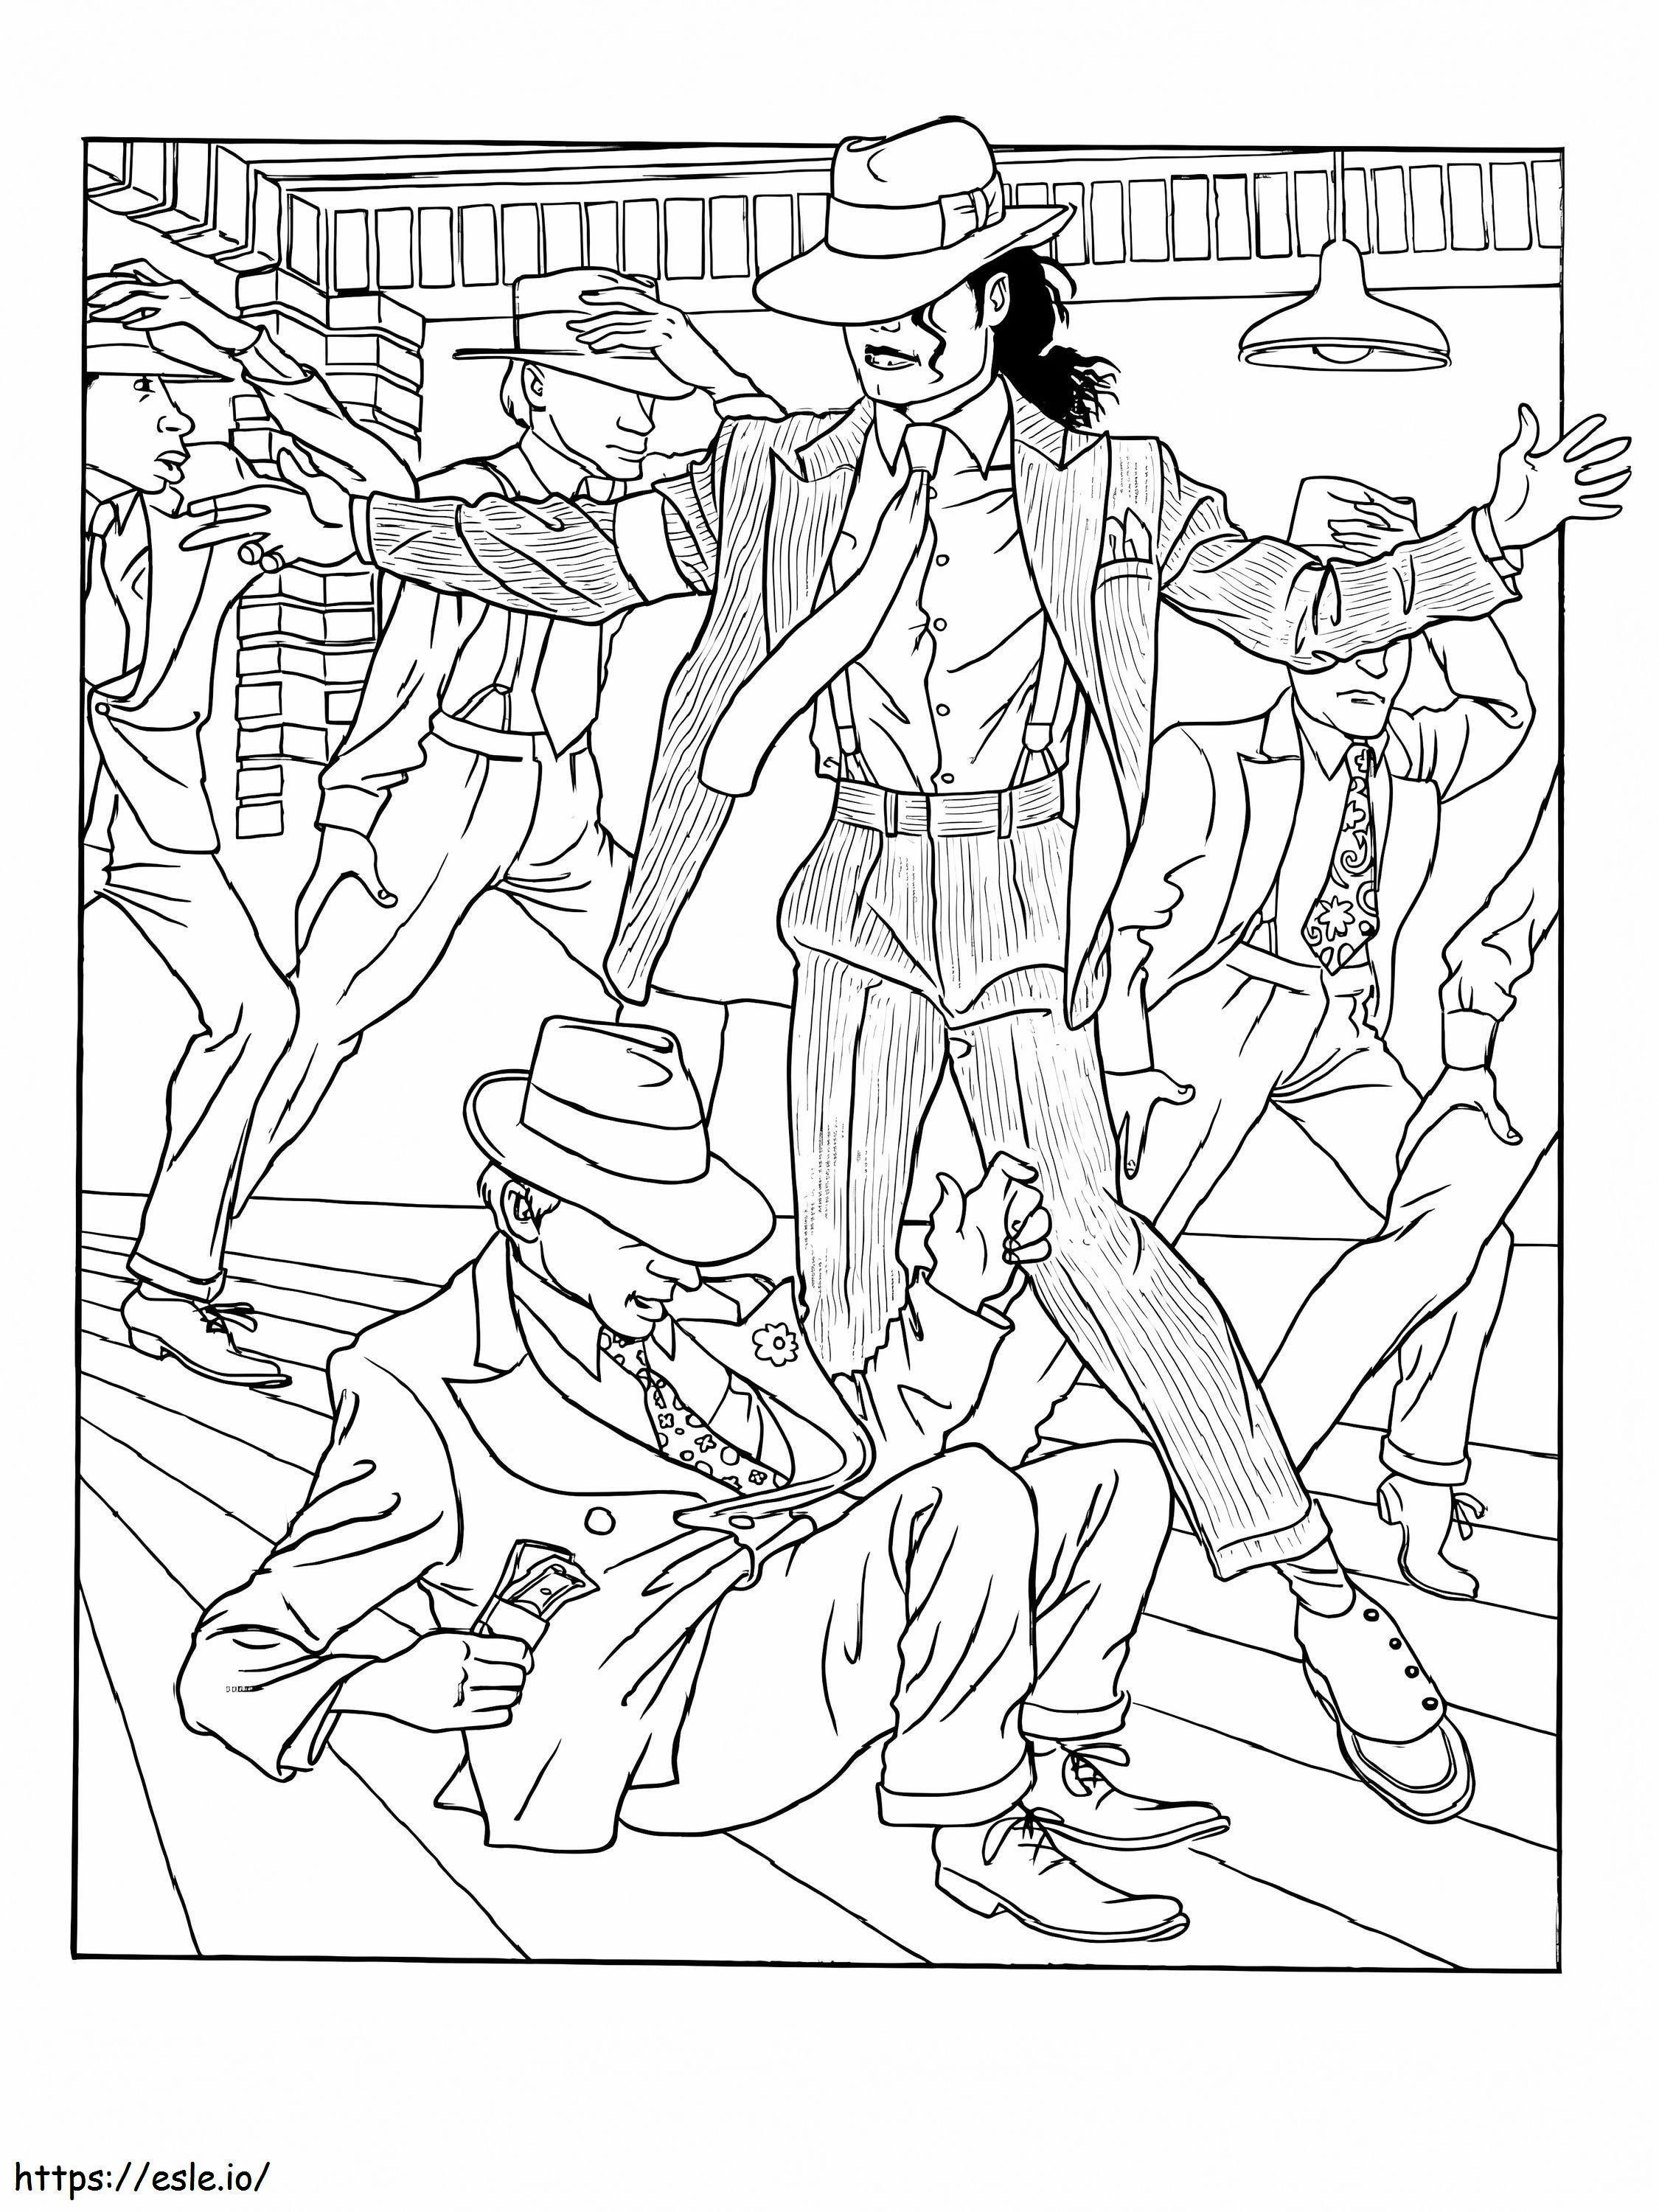 Michael Jackson Dancing And Friends coloring page